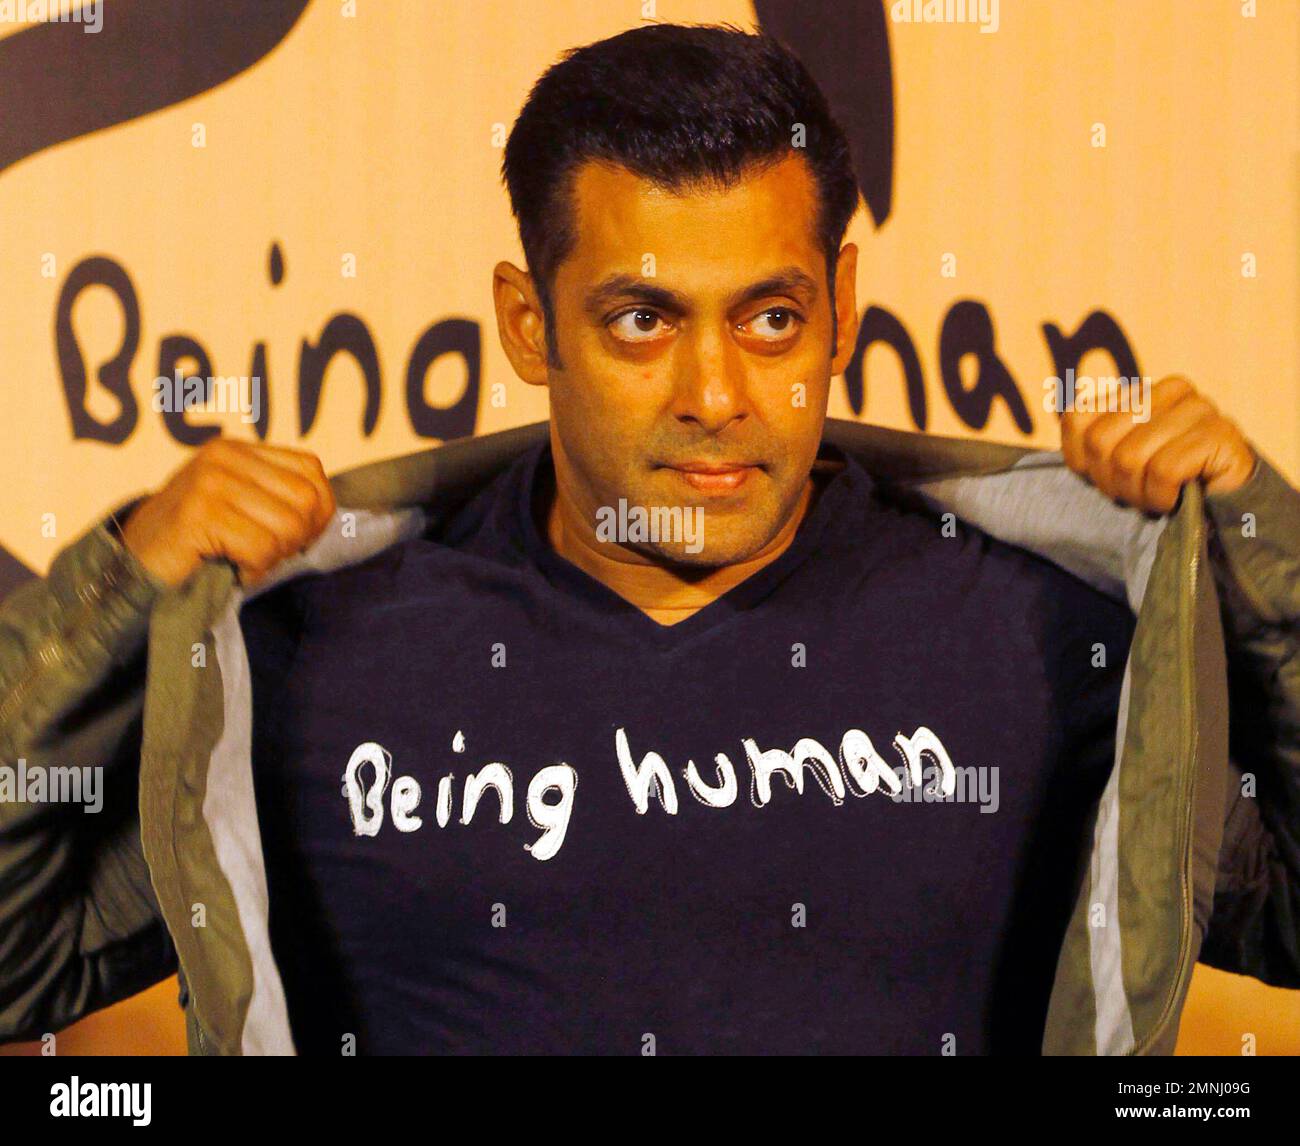 FILE – In this Thursday, Jan. 17, 2013 file photo, Bollywood star Salman  Khan poses wearing a Being Human T-shirt during the launch of Being Human's  first flagship store in Mumbai, India.